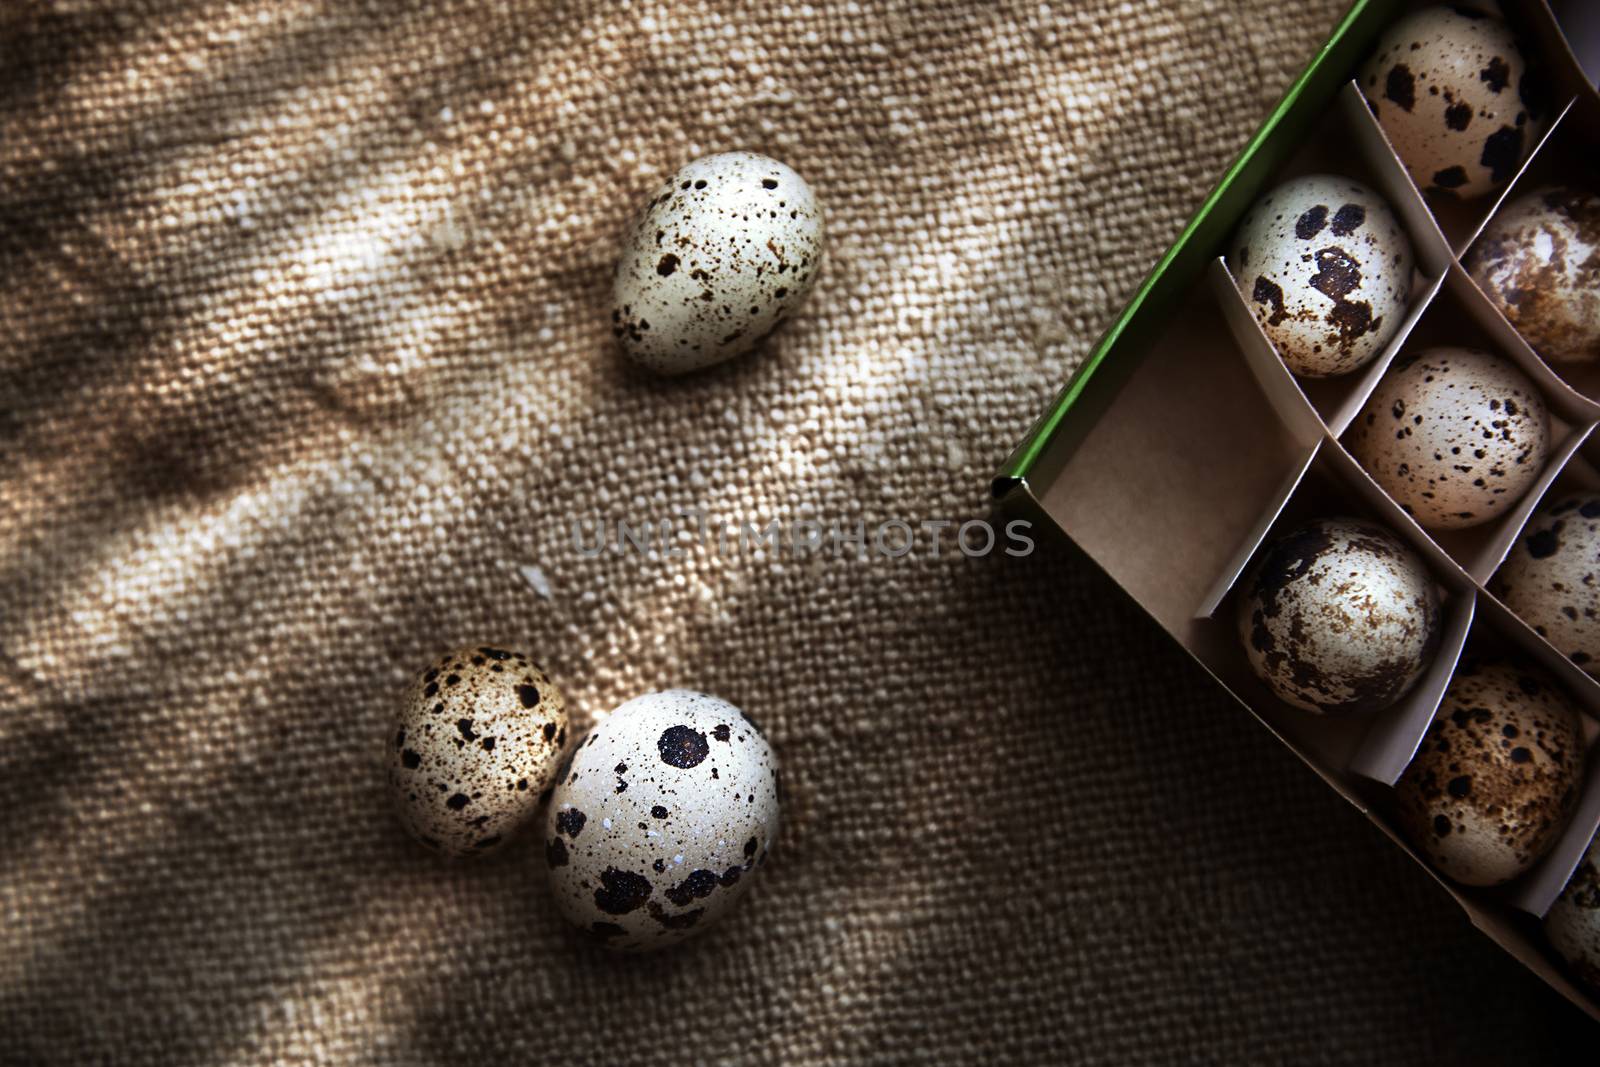 Quail eggs in carton box on a sackcloth. View from above